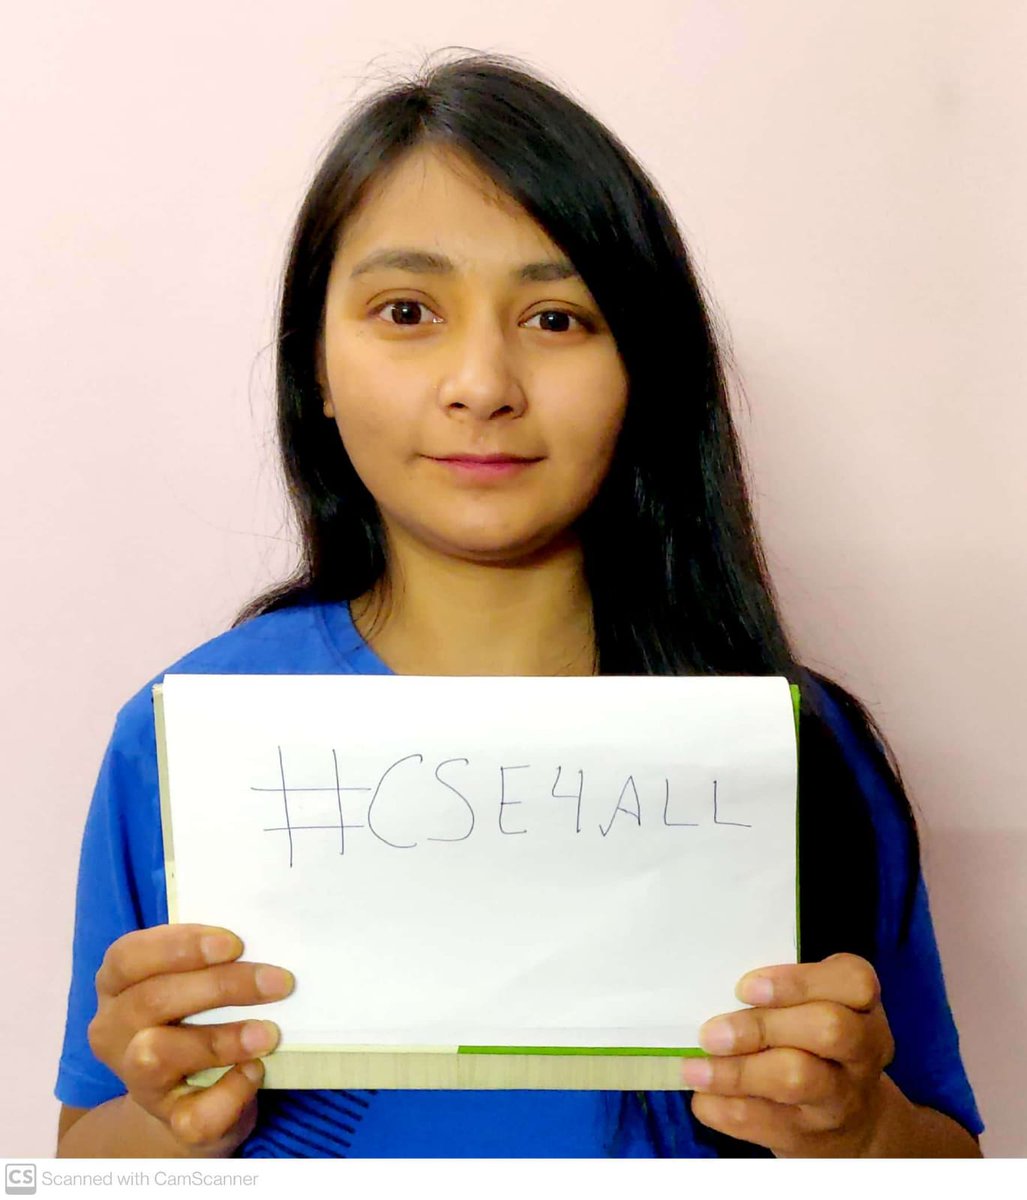 CSE is important to live the healthy live #CSE4ALL #SecondDay #apfsd2022 #ECOSOCYouthAP2022 #YouthLEAD #YPEERAP